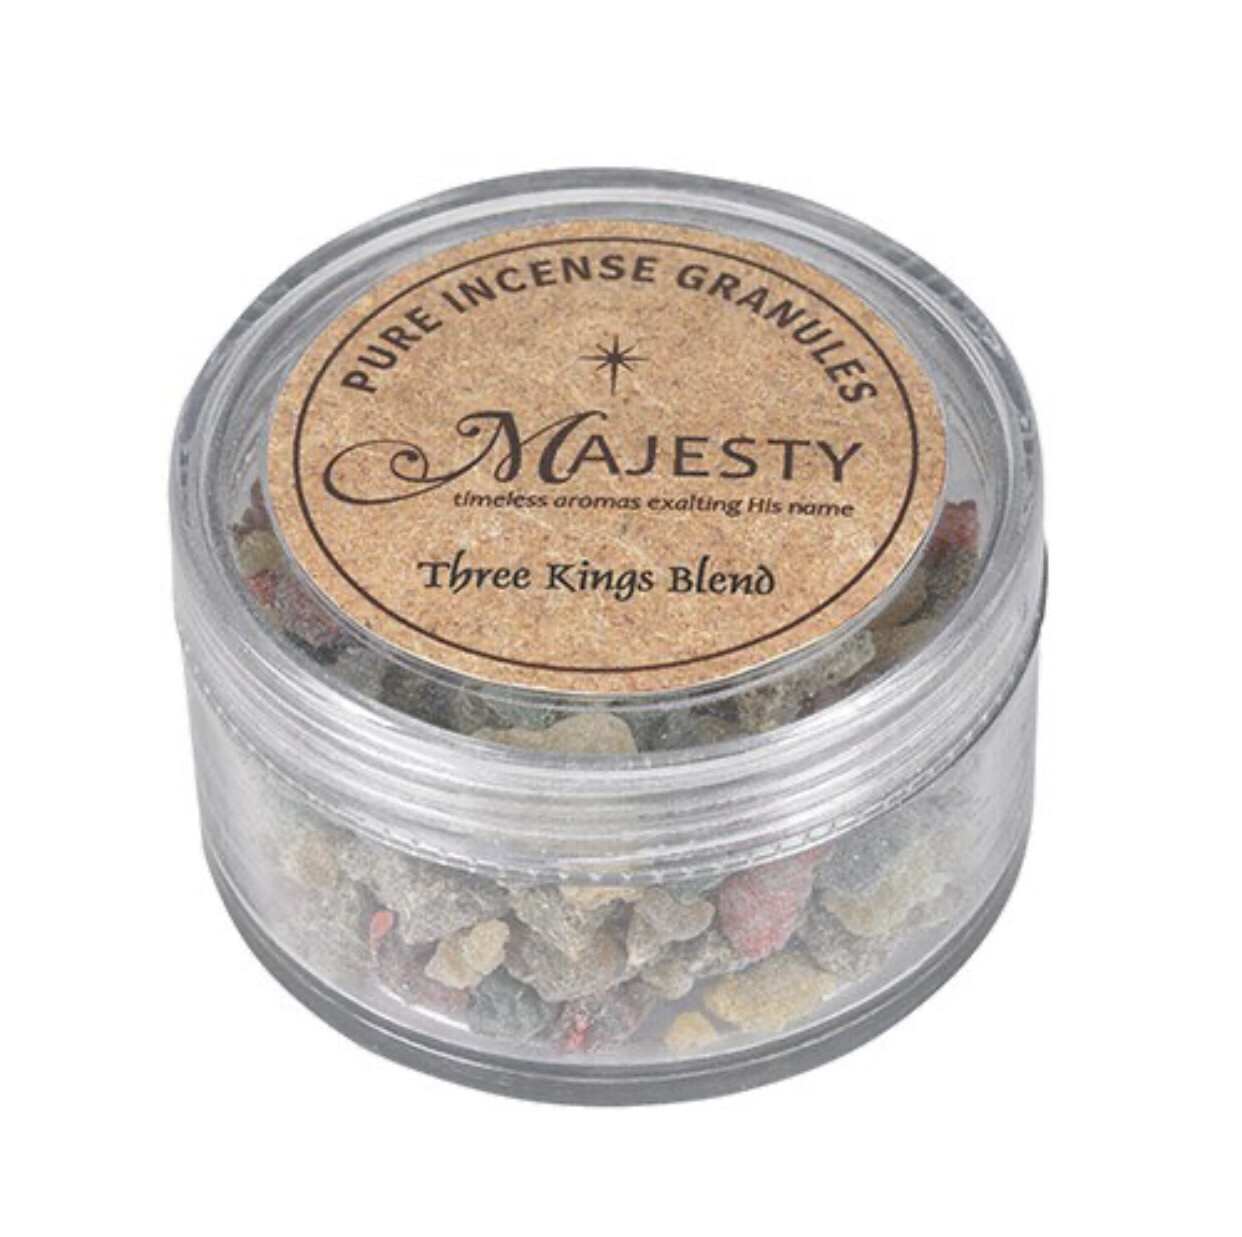 Three kings blend majesty incense